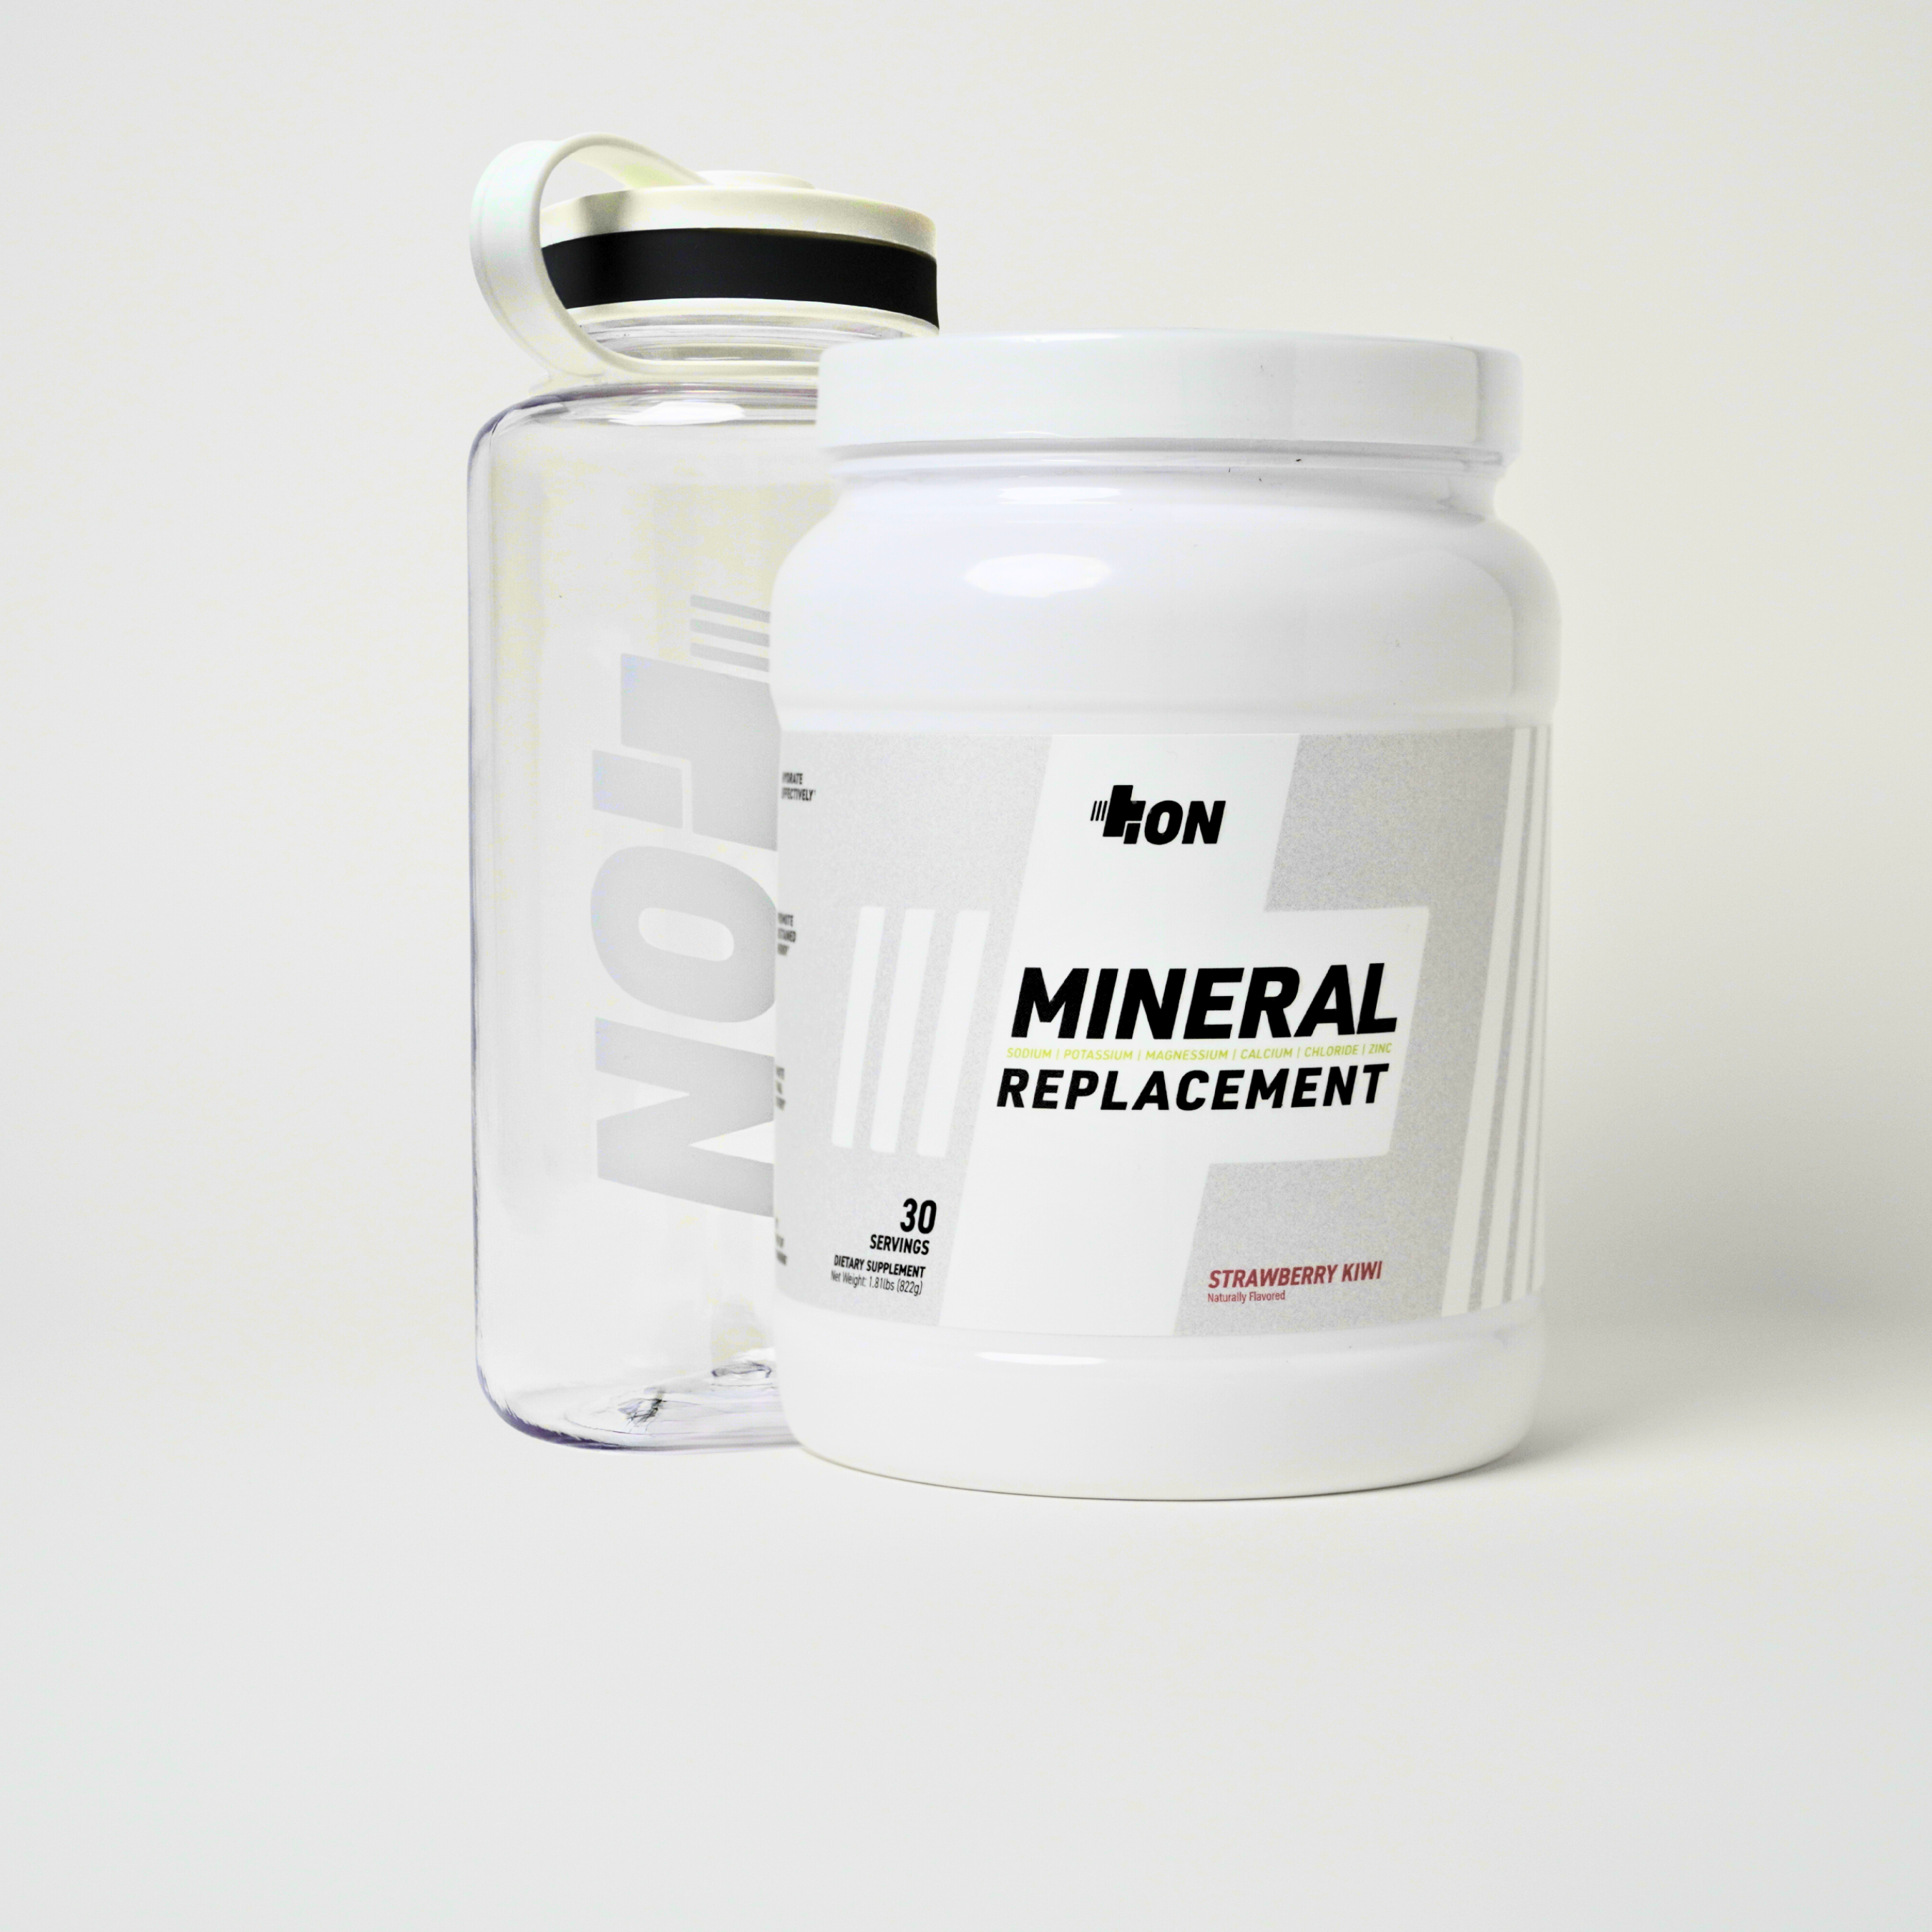 ION MINERAL REPLACEMENT - PERFORMANCE BUNDLE